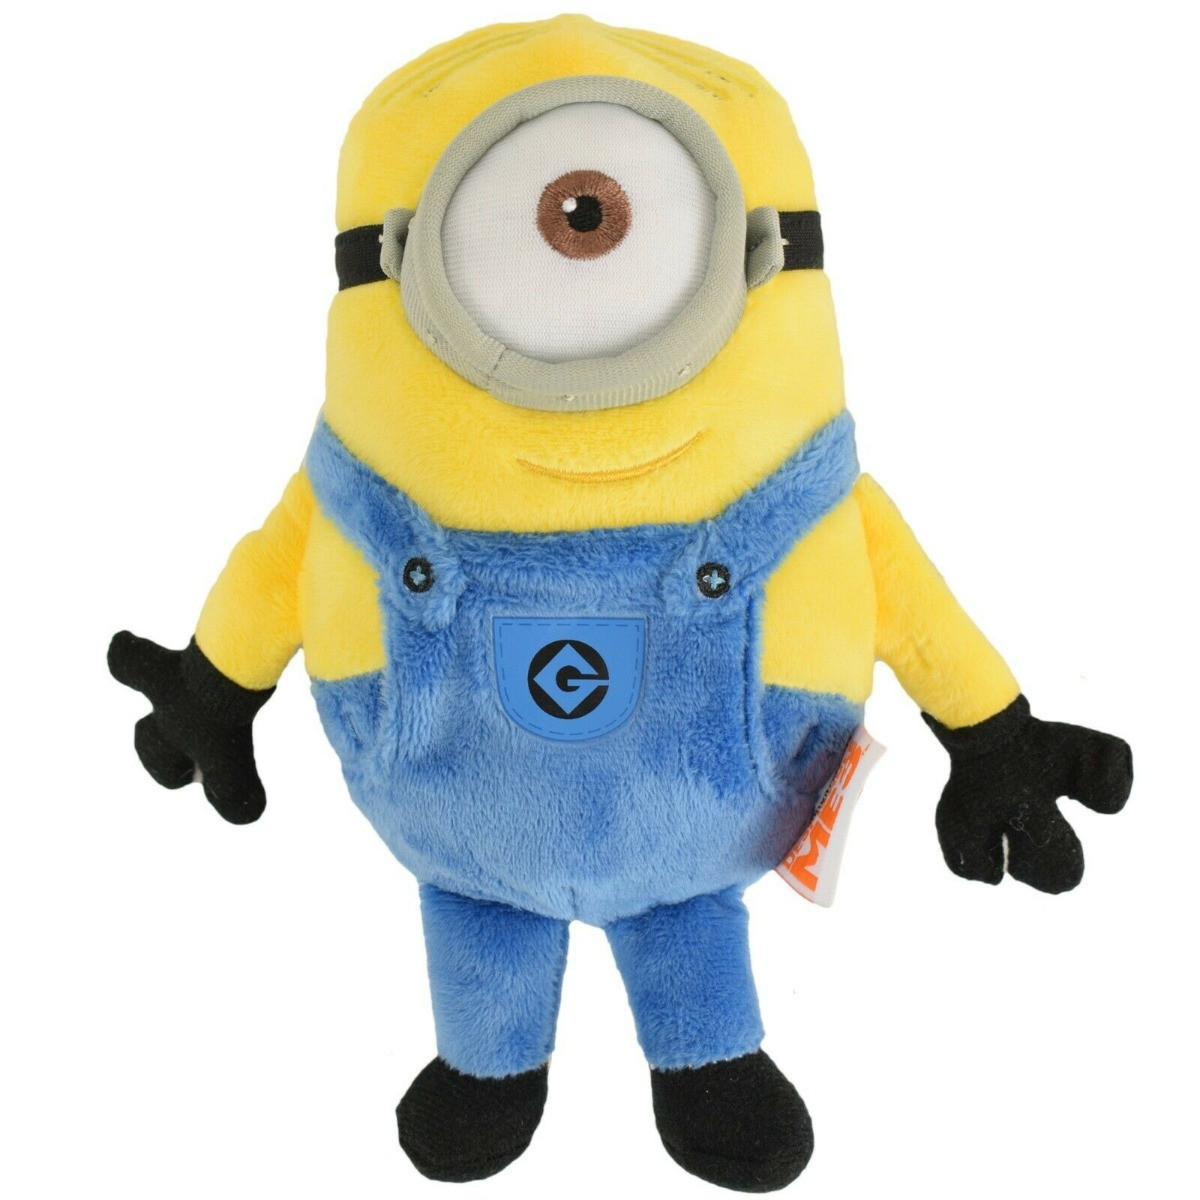 Despicable Me 3 Minions Warmables Microwave Heated Toy - Stuart>